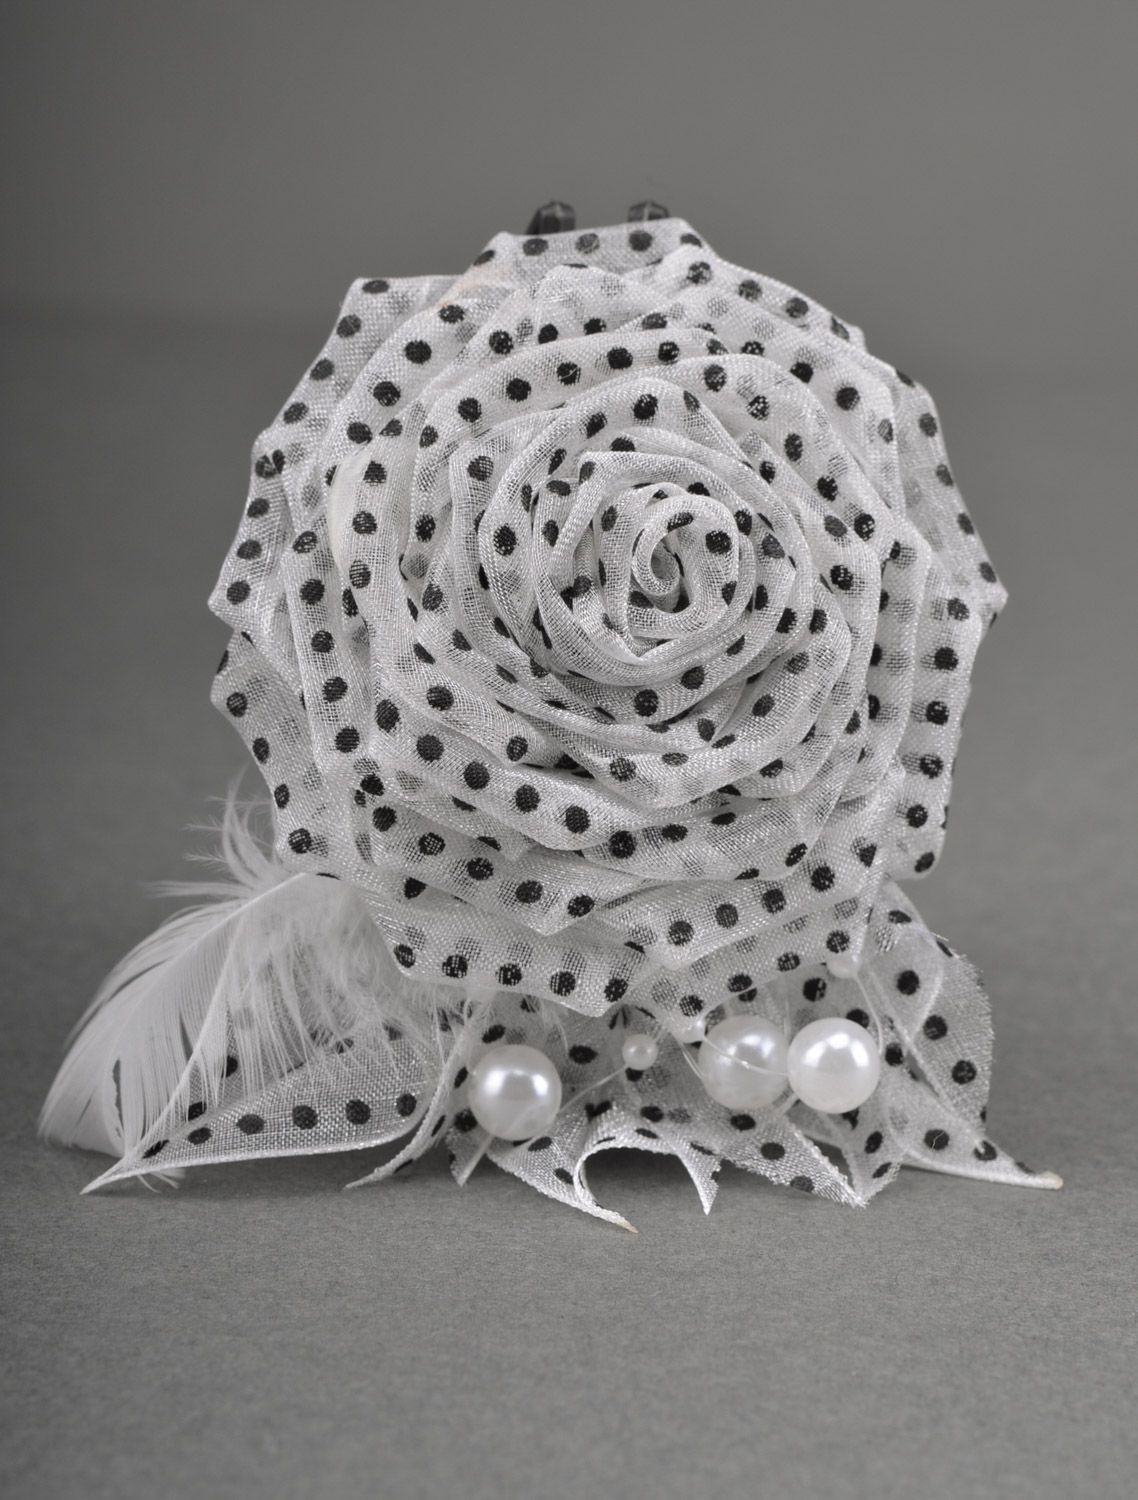 Handmade white polka dot fabric flower brooch with beads and feathers photo 5